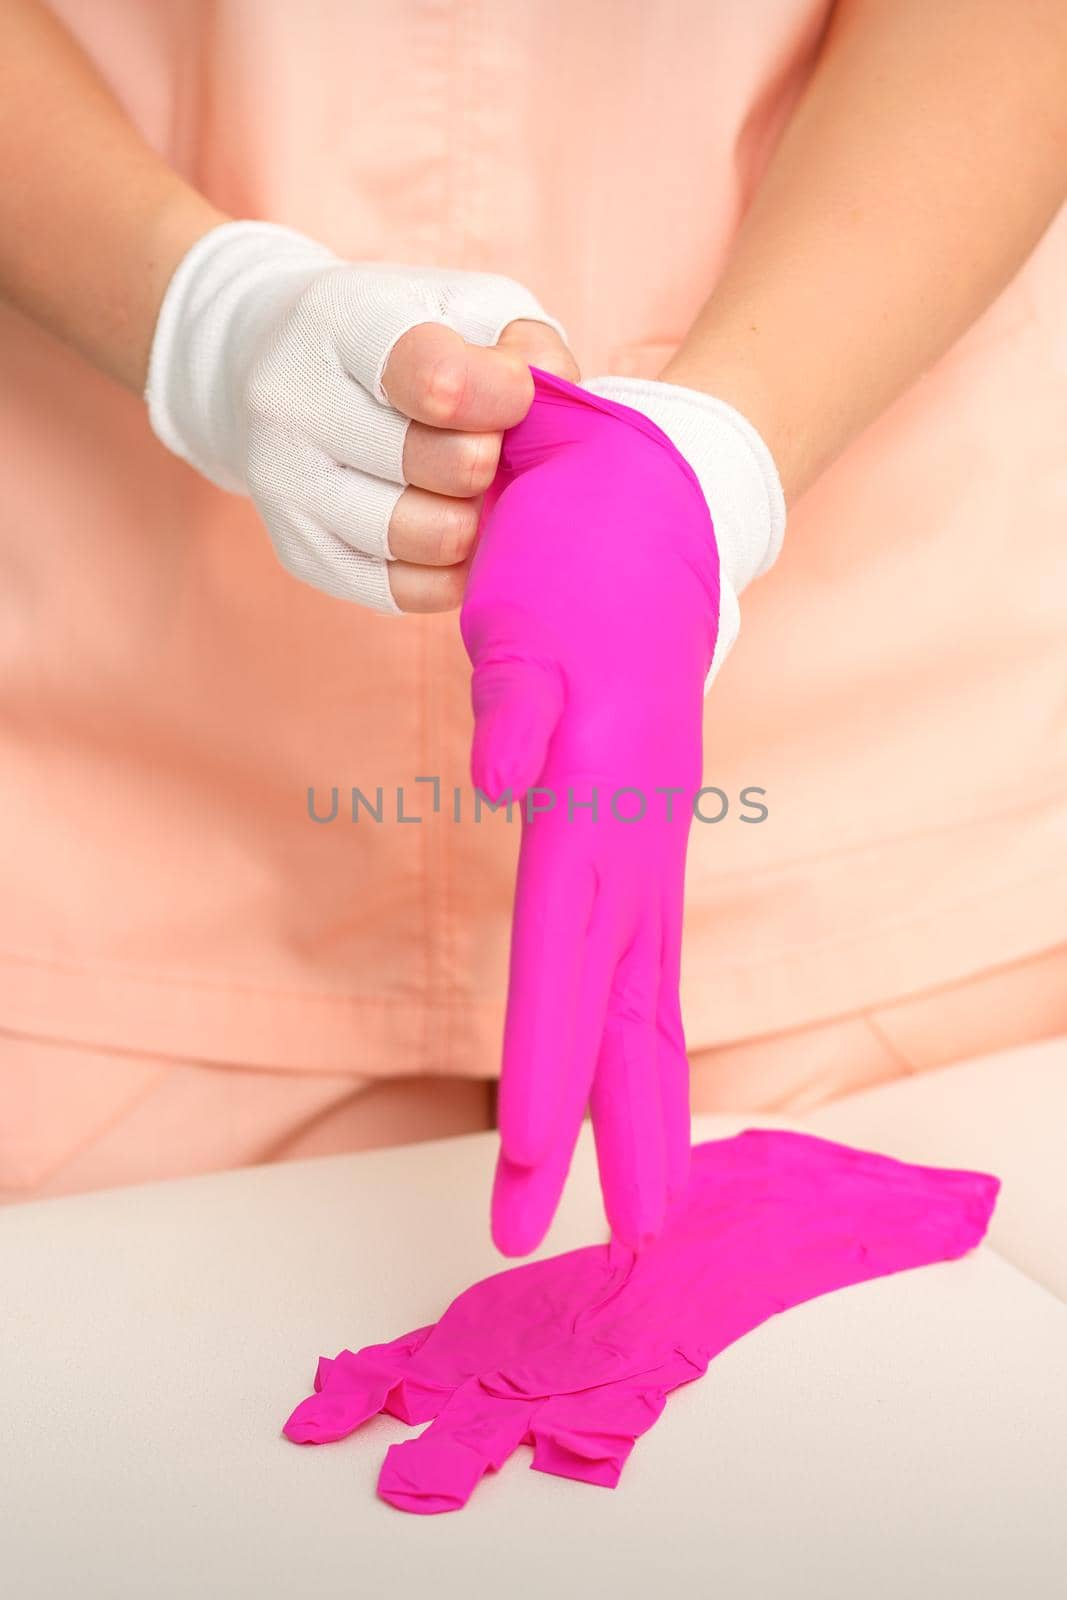 Hands of beautician put on rubber pink gloves prepare to receive clients